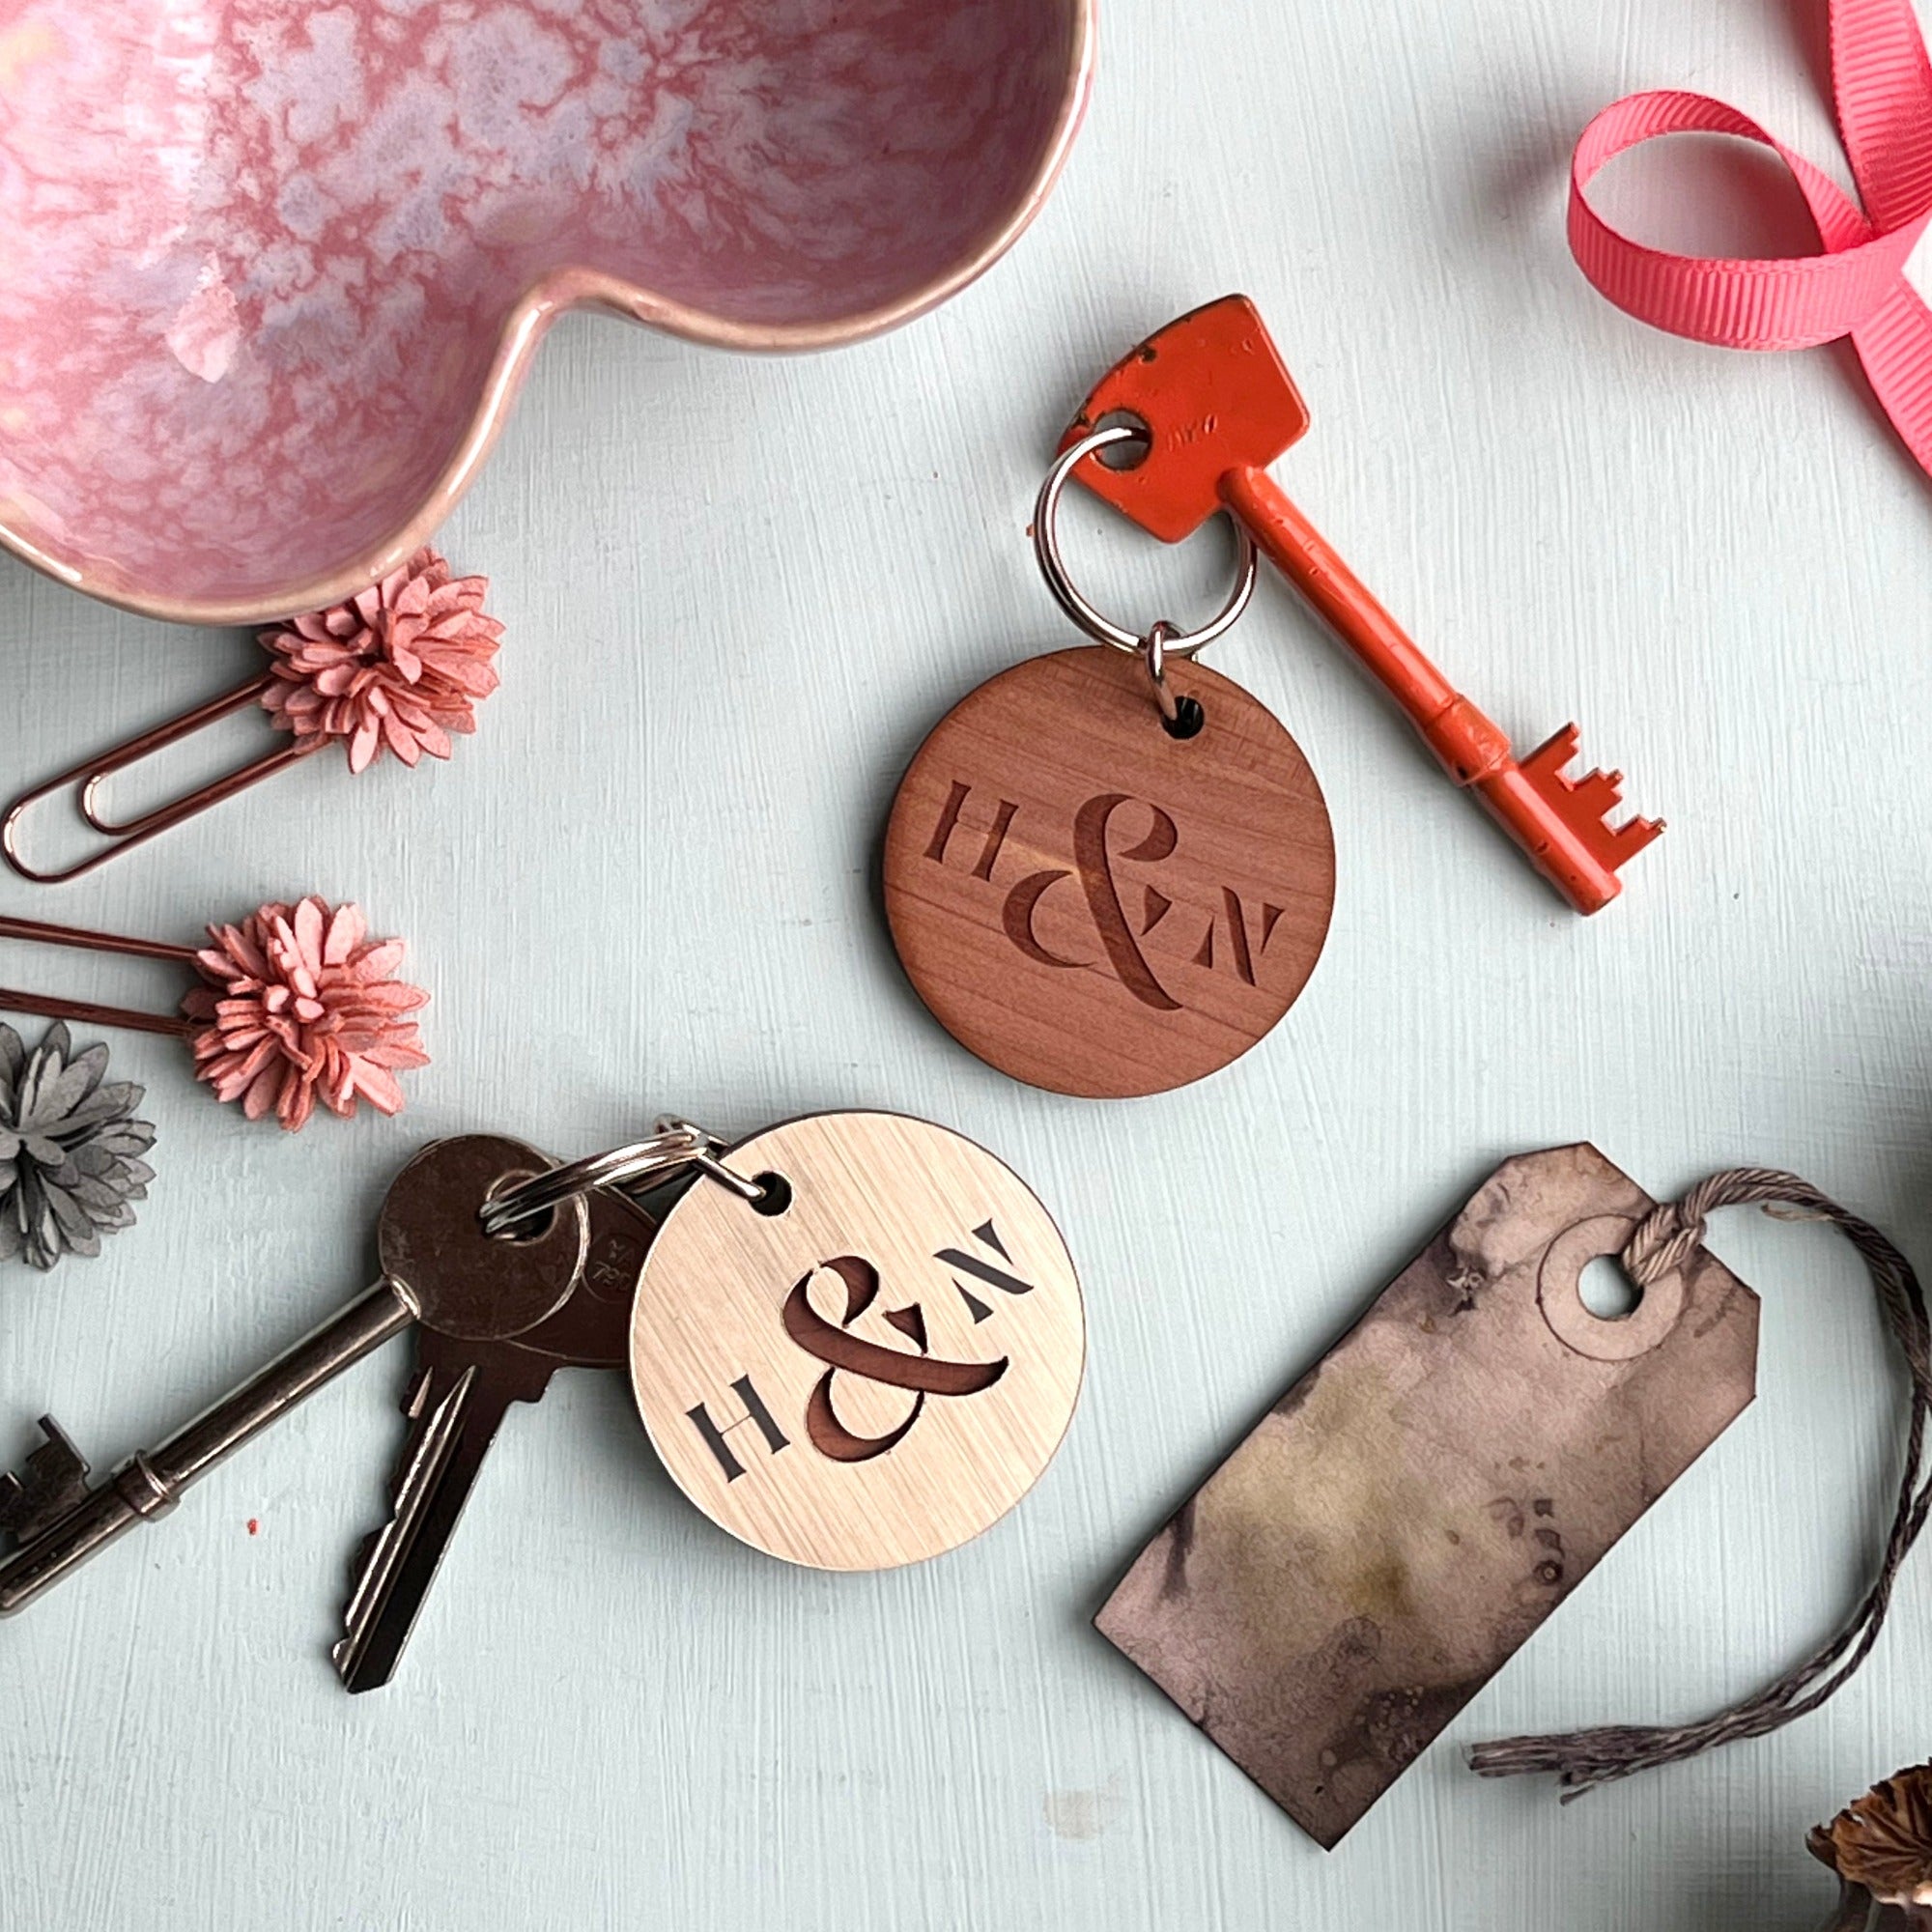 Pair of circular keyrings, 1 made from wood and 1 with a metallic gold finish, engraved with initials and an ampersand